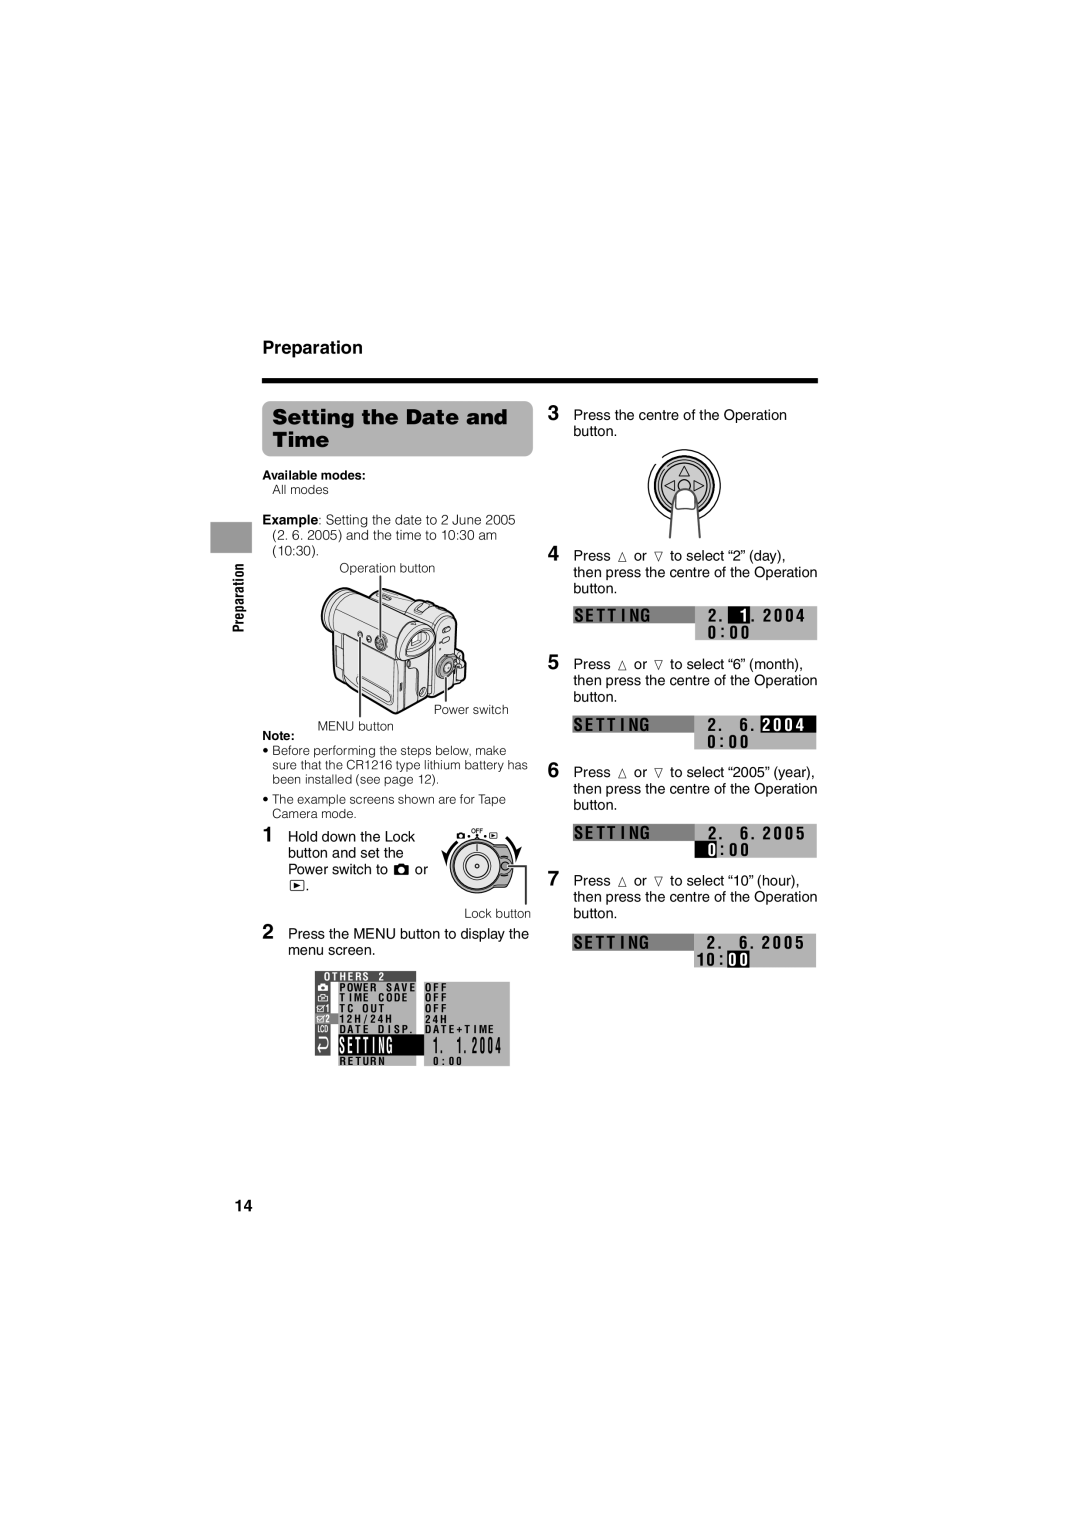 Sharp VL-Z400H-T operation manual Setting the Date and Time, Se T T I Ng, 2. 6 . 2 0 0, Preparation 